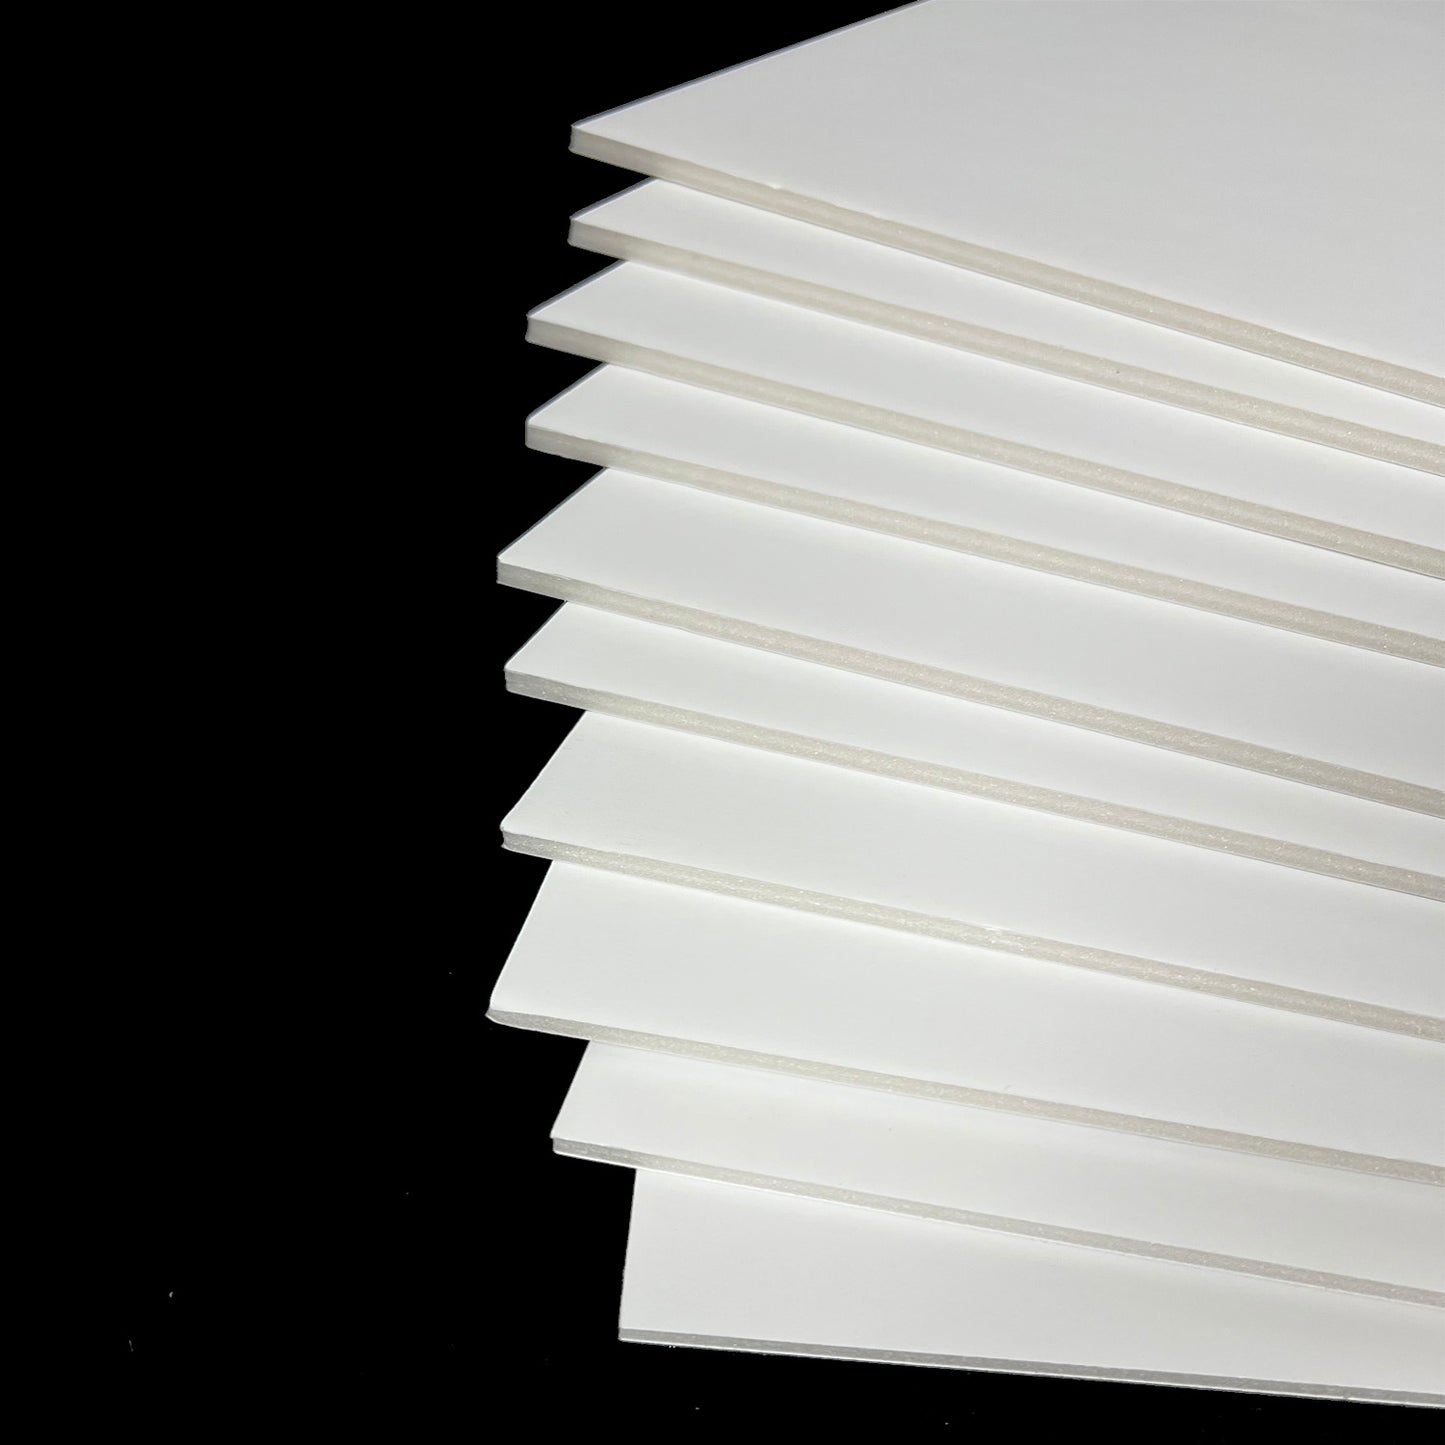 A3 White 5mm Foamboard - Pack of 10